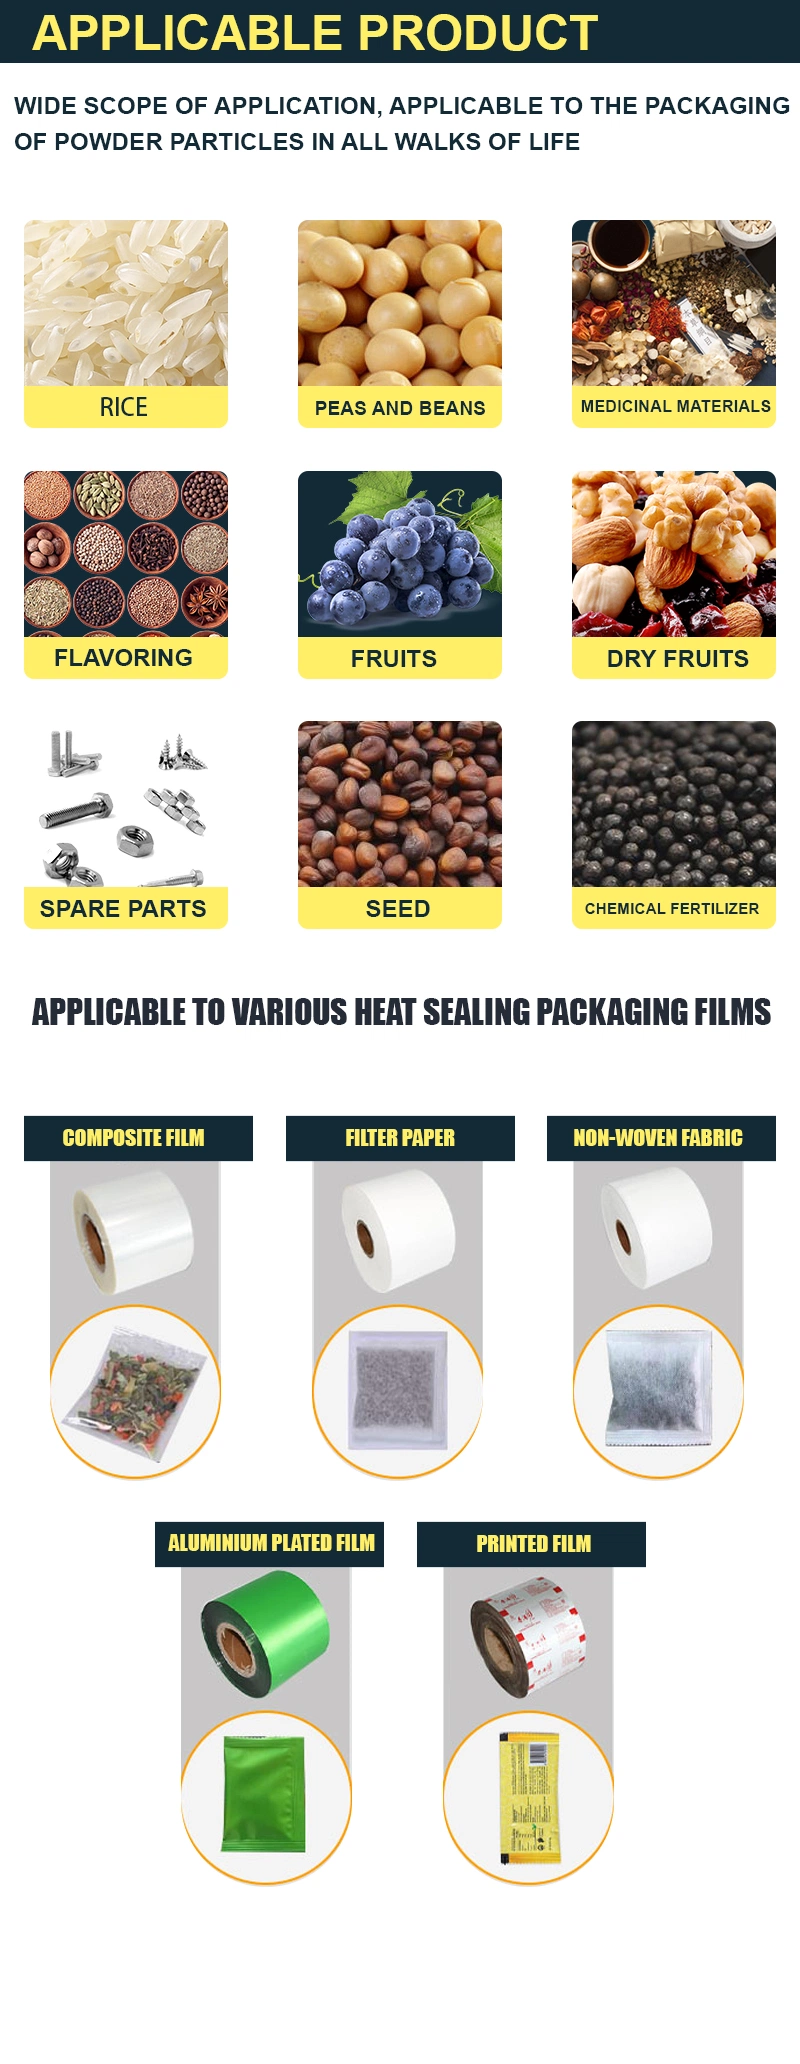 200g 1 Kg 1kg 5kg Fully Automatic Bag Rice Weighing Packing Machine Seal Fill Seed Sugar Bean Cooked Puffed Paper Cacao